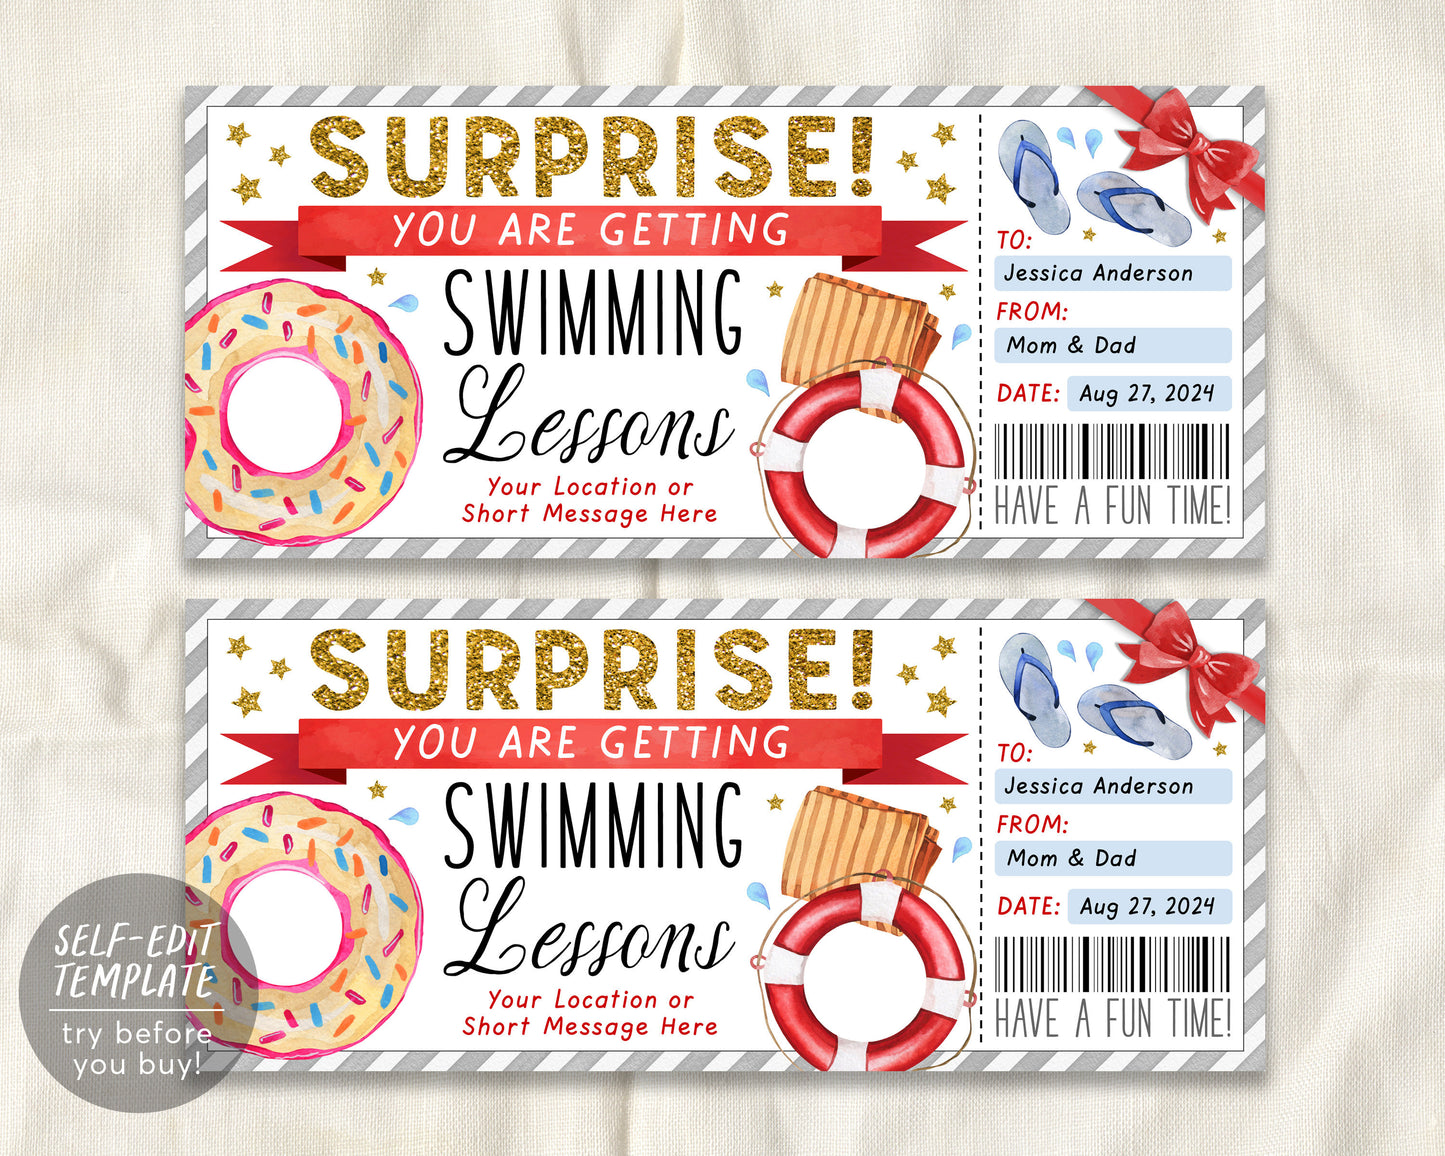 Swim Lessons Gift Certificate Ticket Editable Template